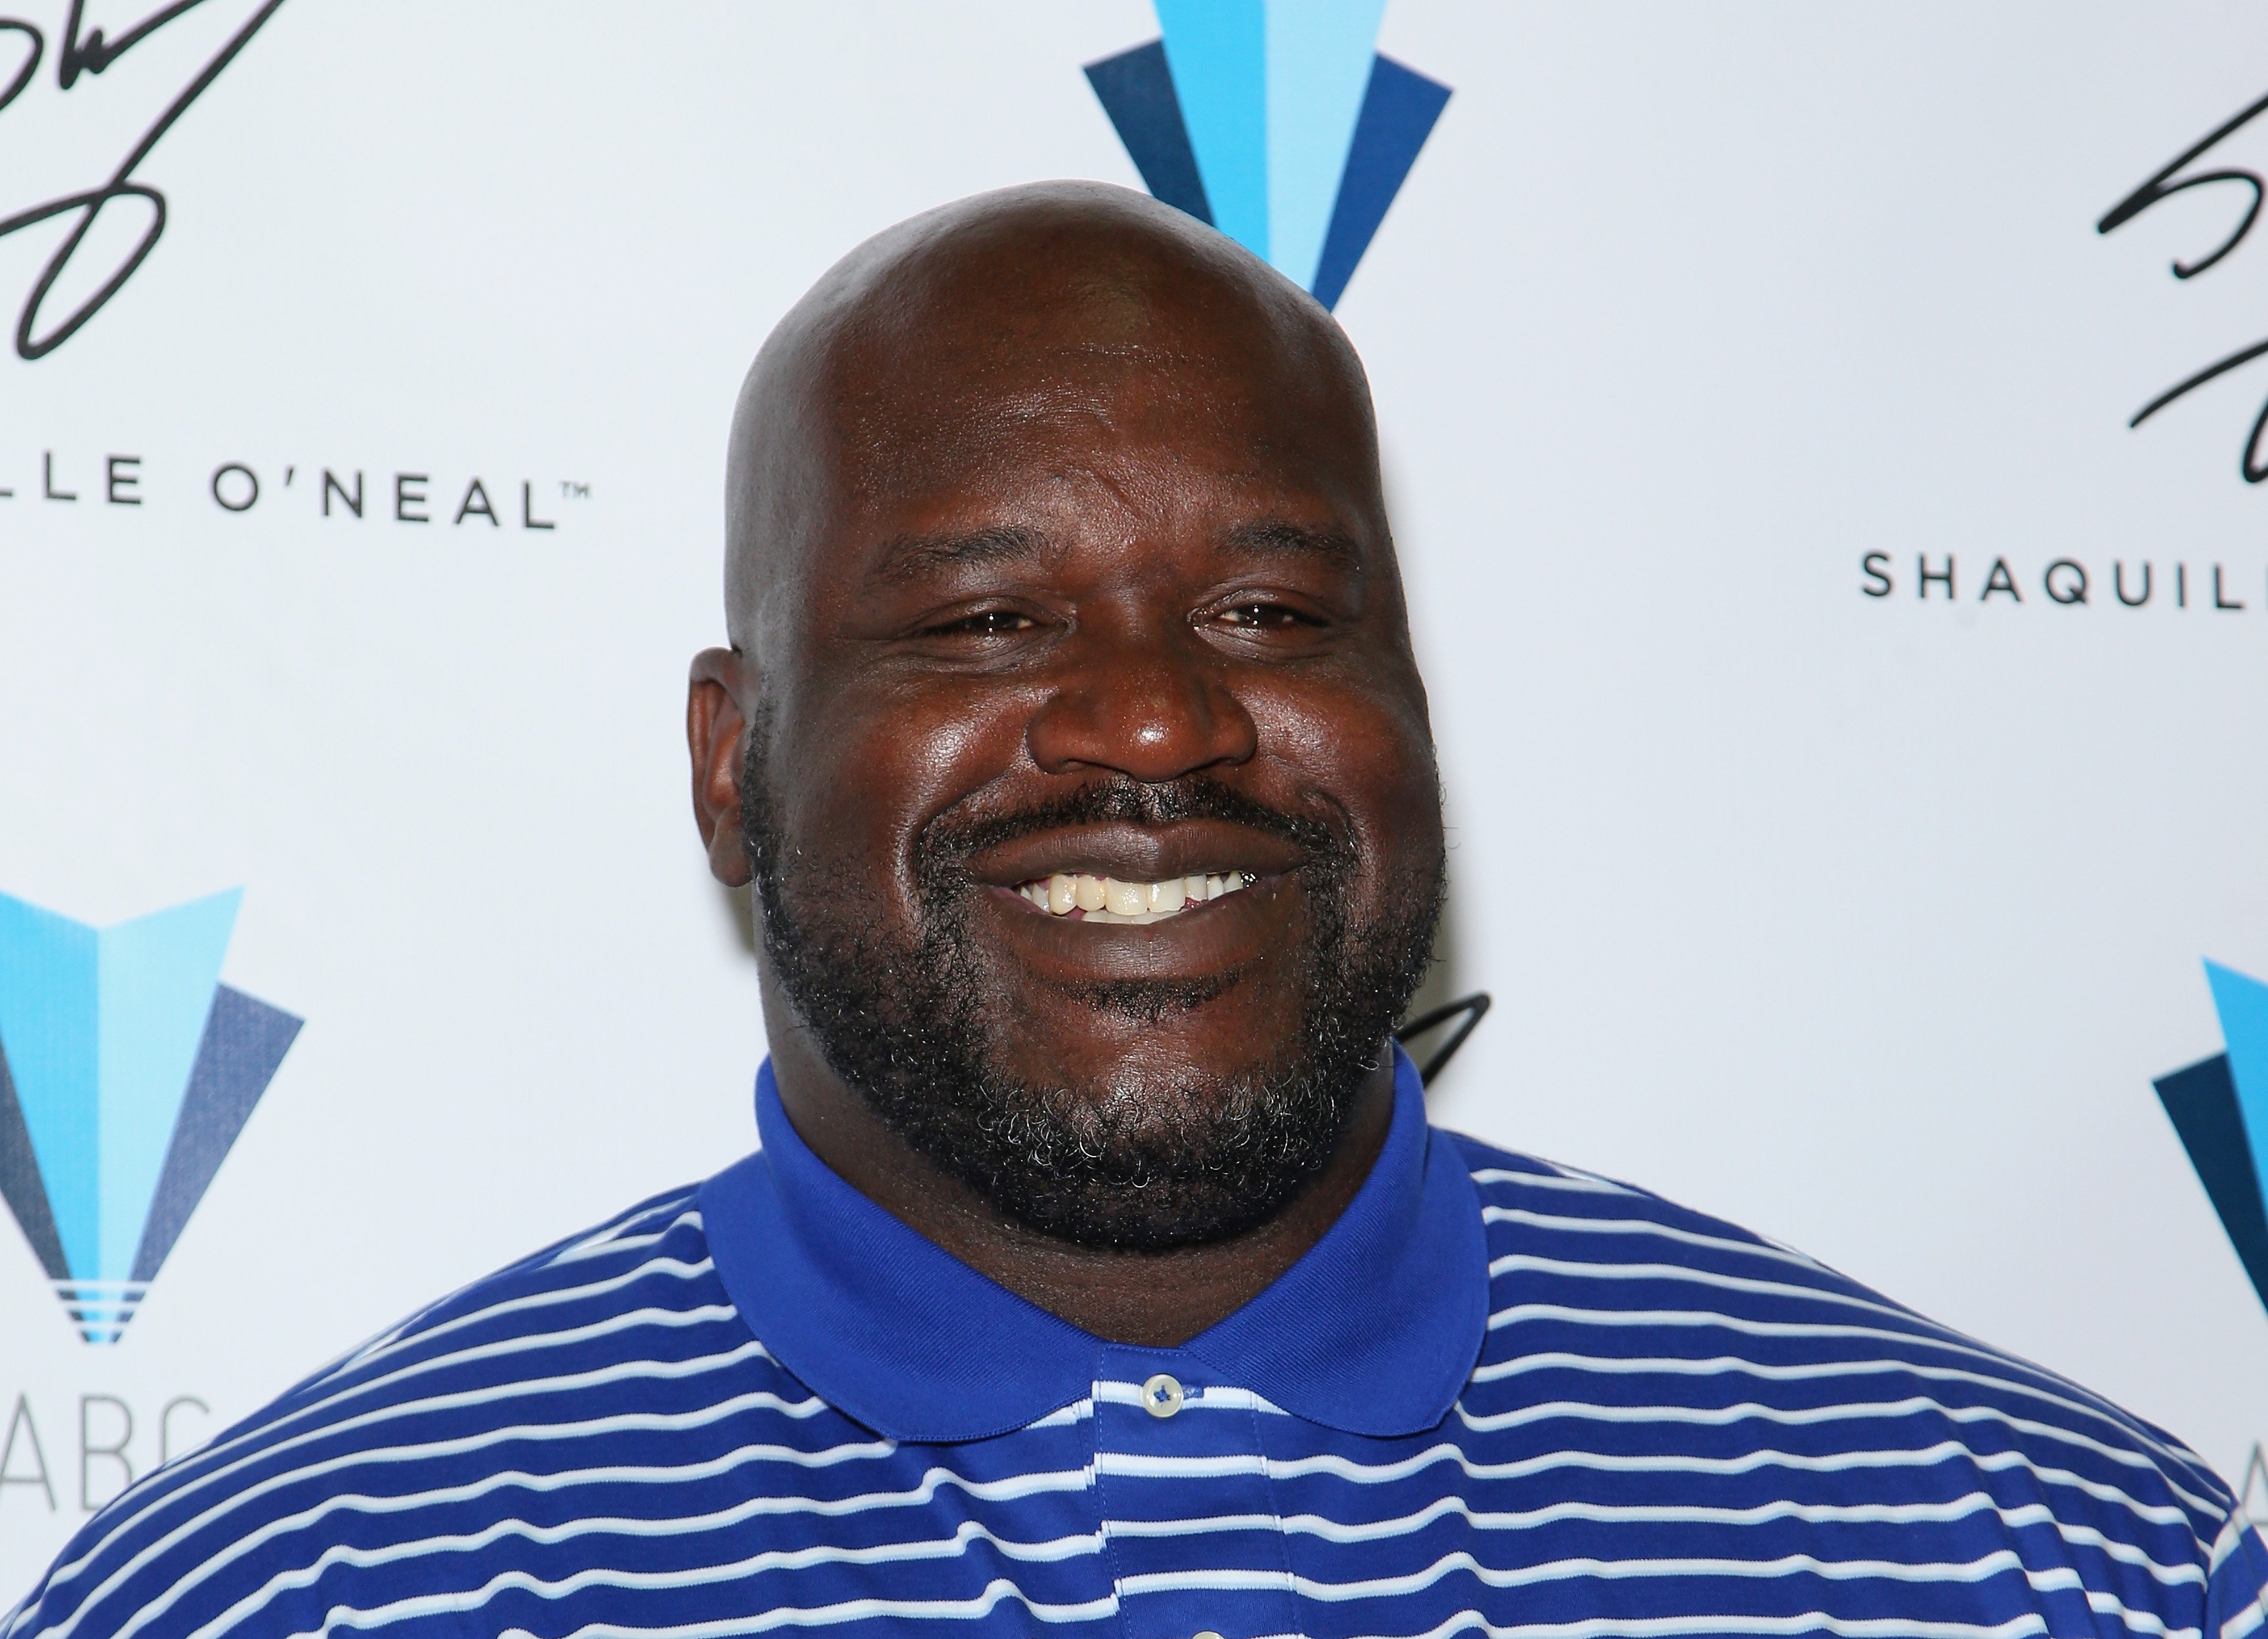 Shaquille O'Neal poses in the Authentic Brands Group booth during the Licensing Expo 2016 at the Mandalay Bay Convention Center on June 21, 2016. | Source: Getty Images